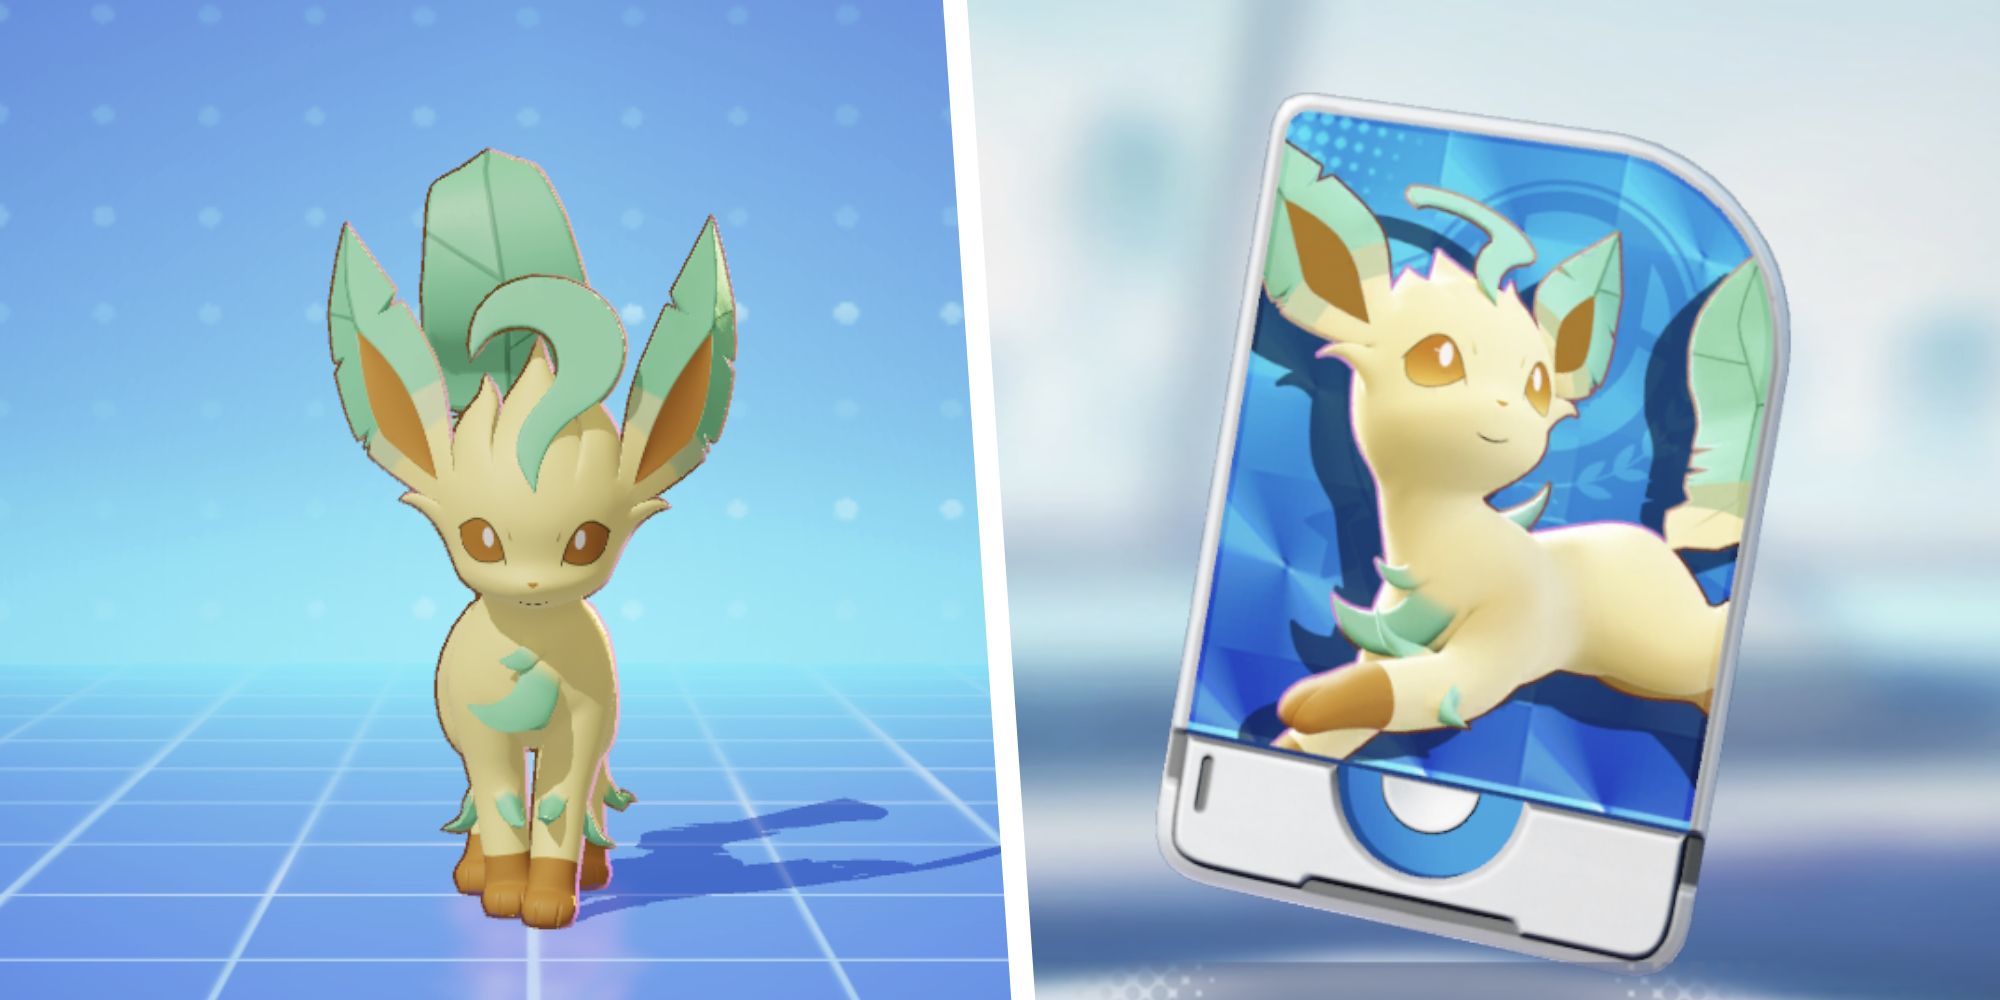 Image of Leafeon from Pokemon Unite split with an image of the Leafeon Unite License